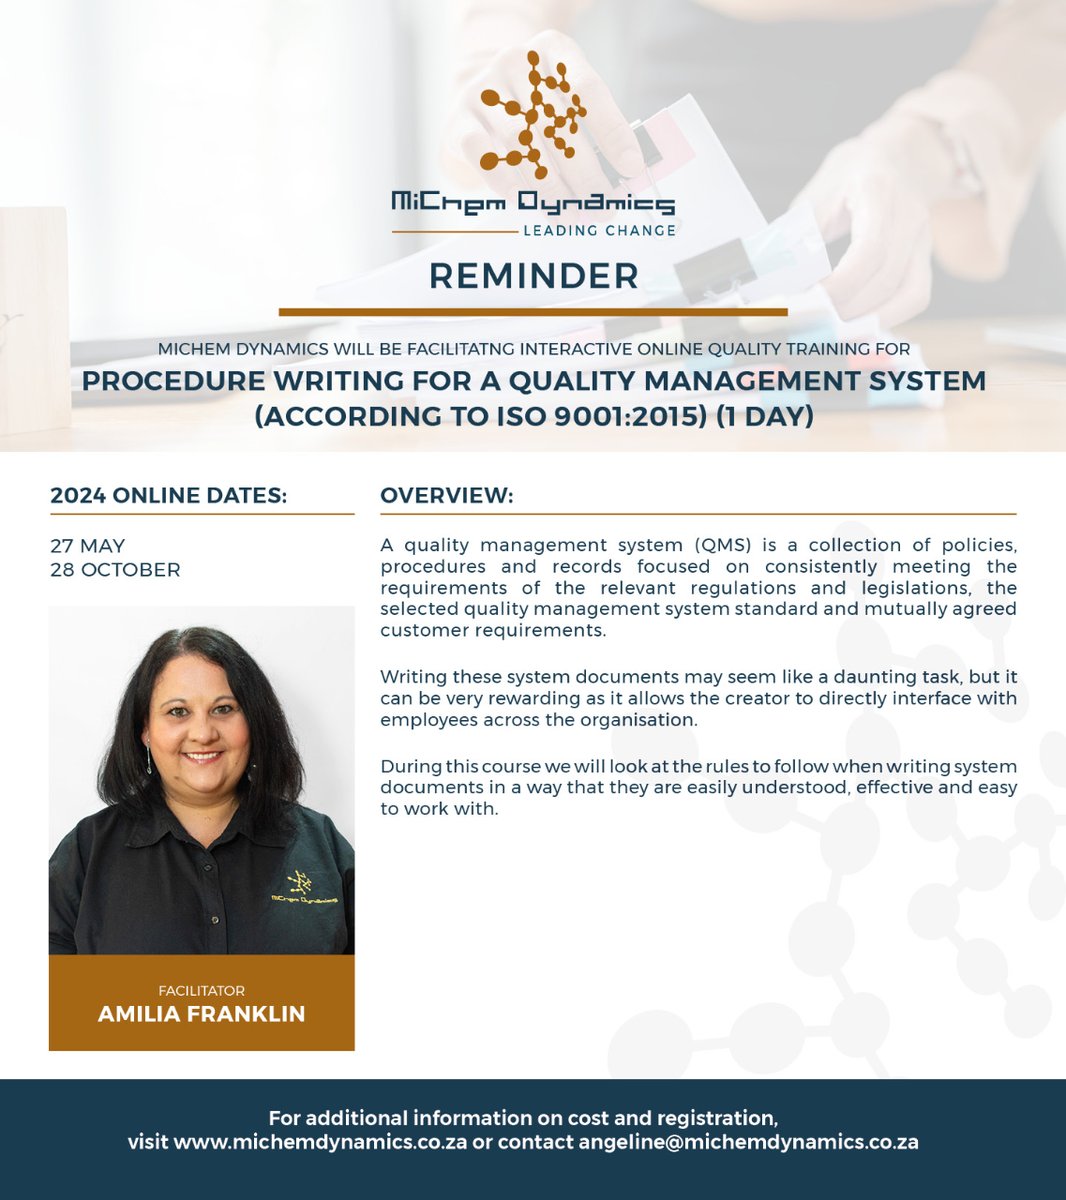 REMINDER - QUALITY TRAINING (ISO 9001) For info regarding course content, dates, cost & registration, visit michemdynamics.com/training/quali…  Contact angeline@michemdynamics.com / anna@michemdynamics.com for further info!  #creatingabetterfuture #fightinginequality #quality #ISO9001